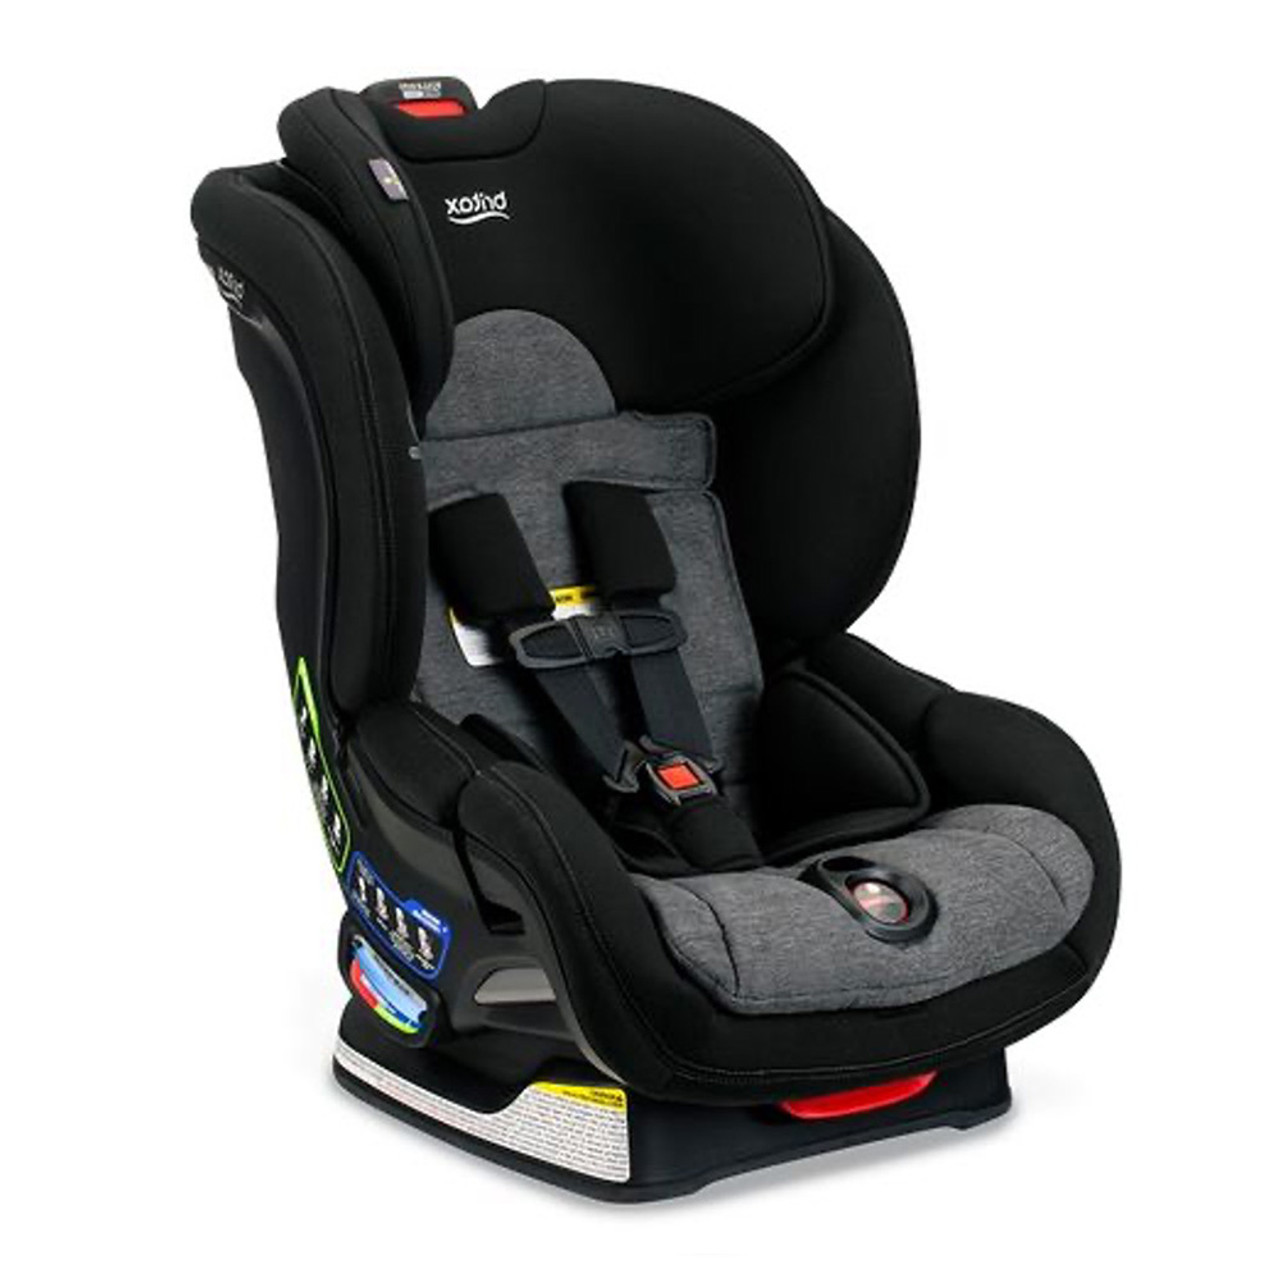 Convertible Car Seats by Britax | Buy Online - Bambibaby.com